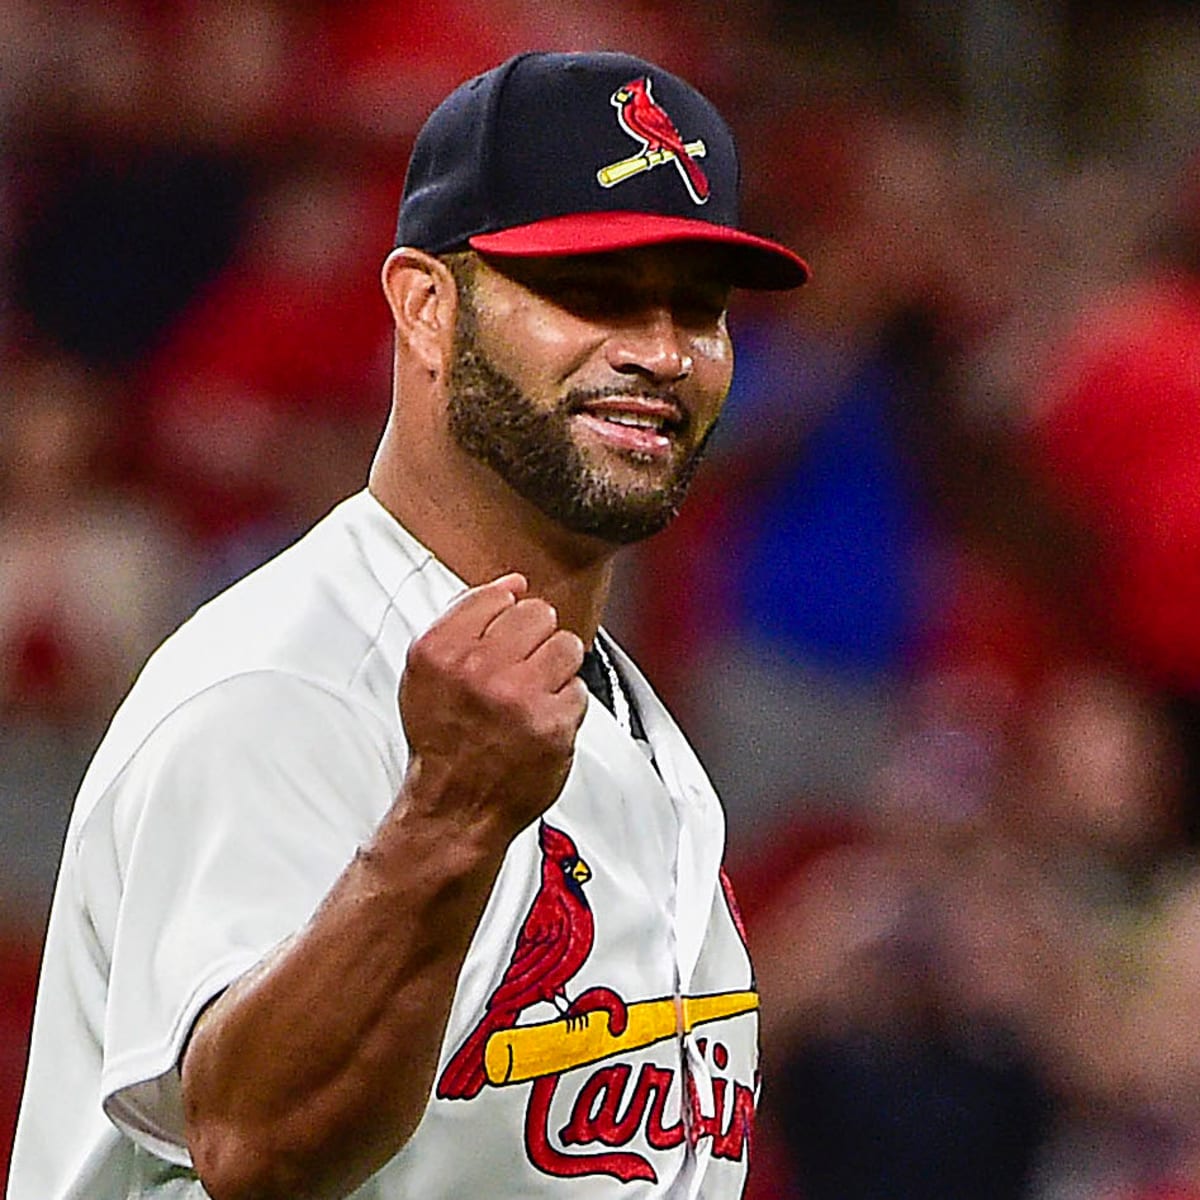 Pujols makes pitching debut, Cards offense catches fire in 15-6